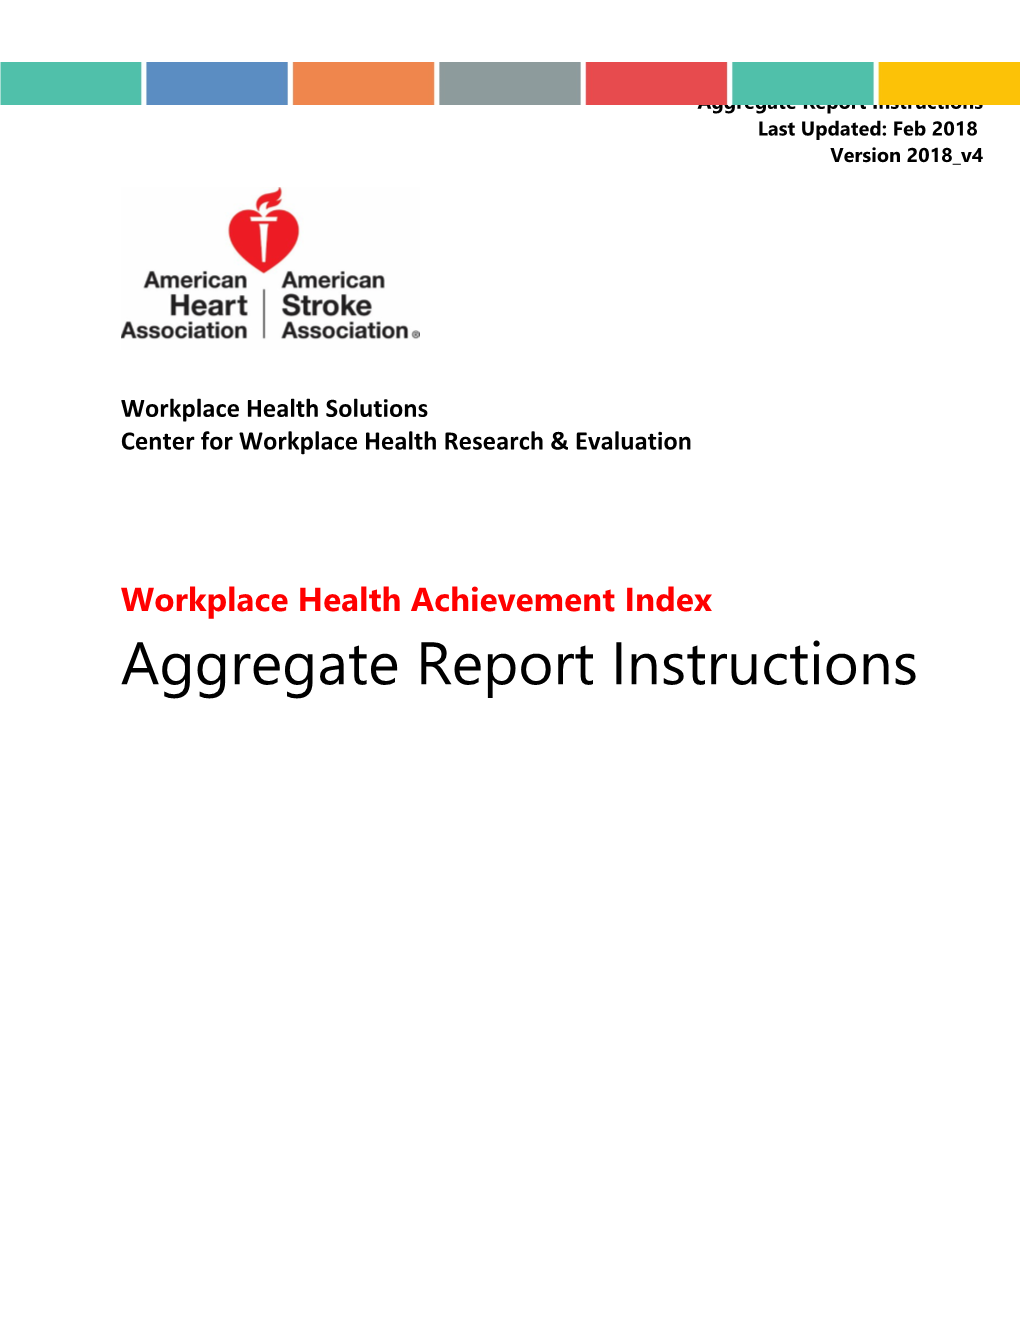 Aggregate Report Instructions